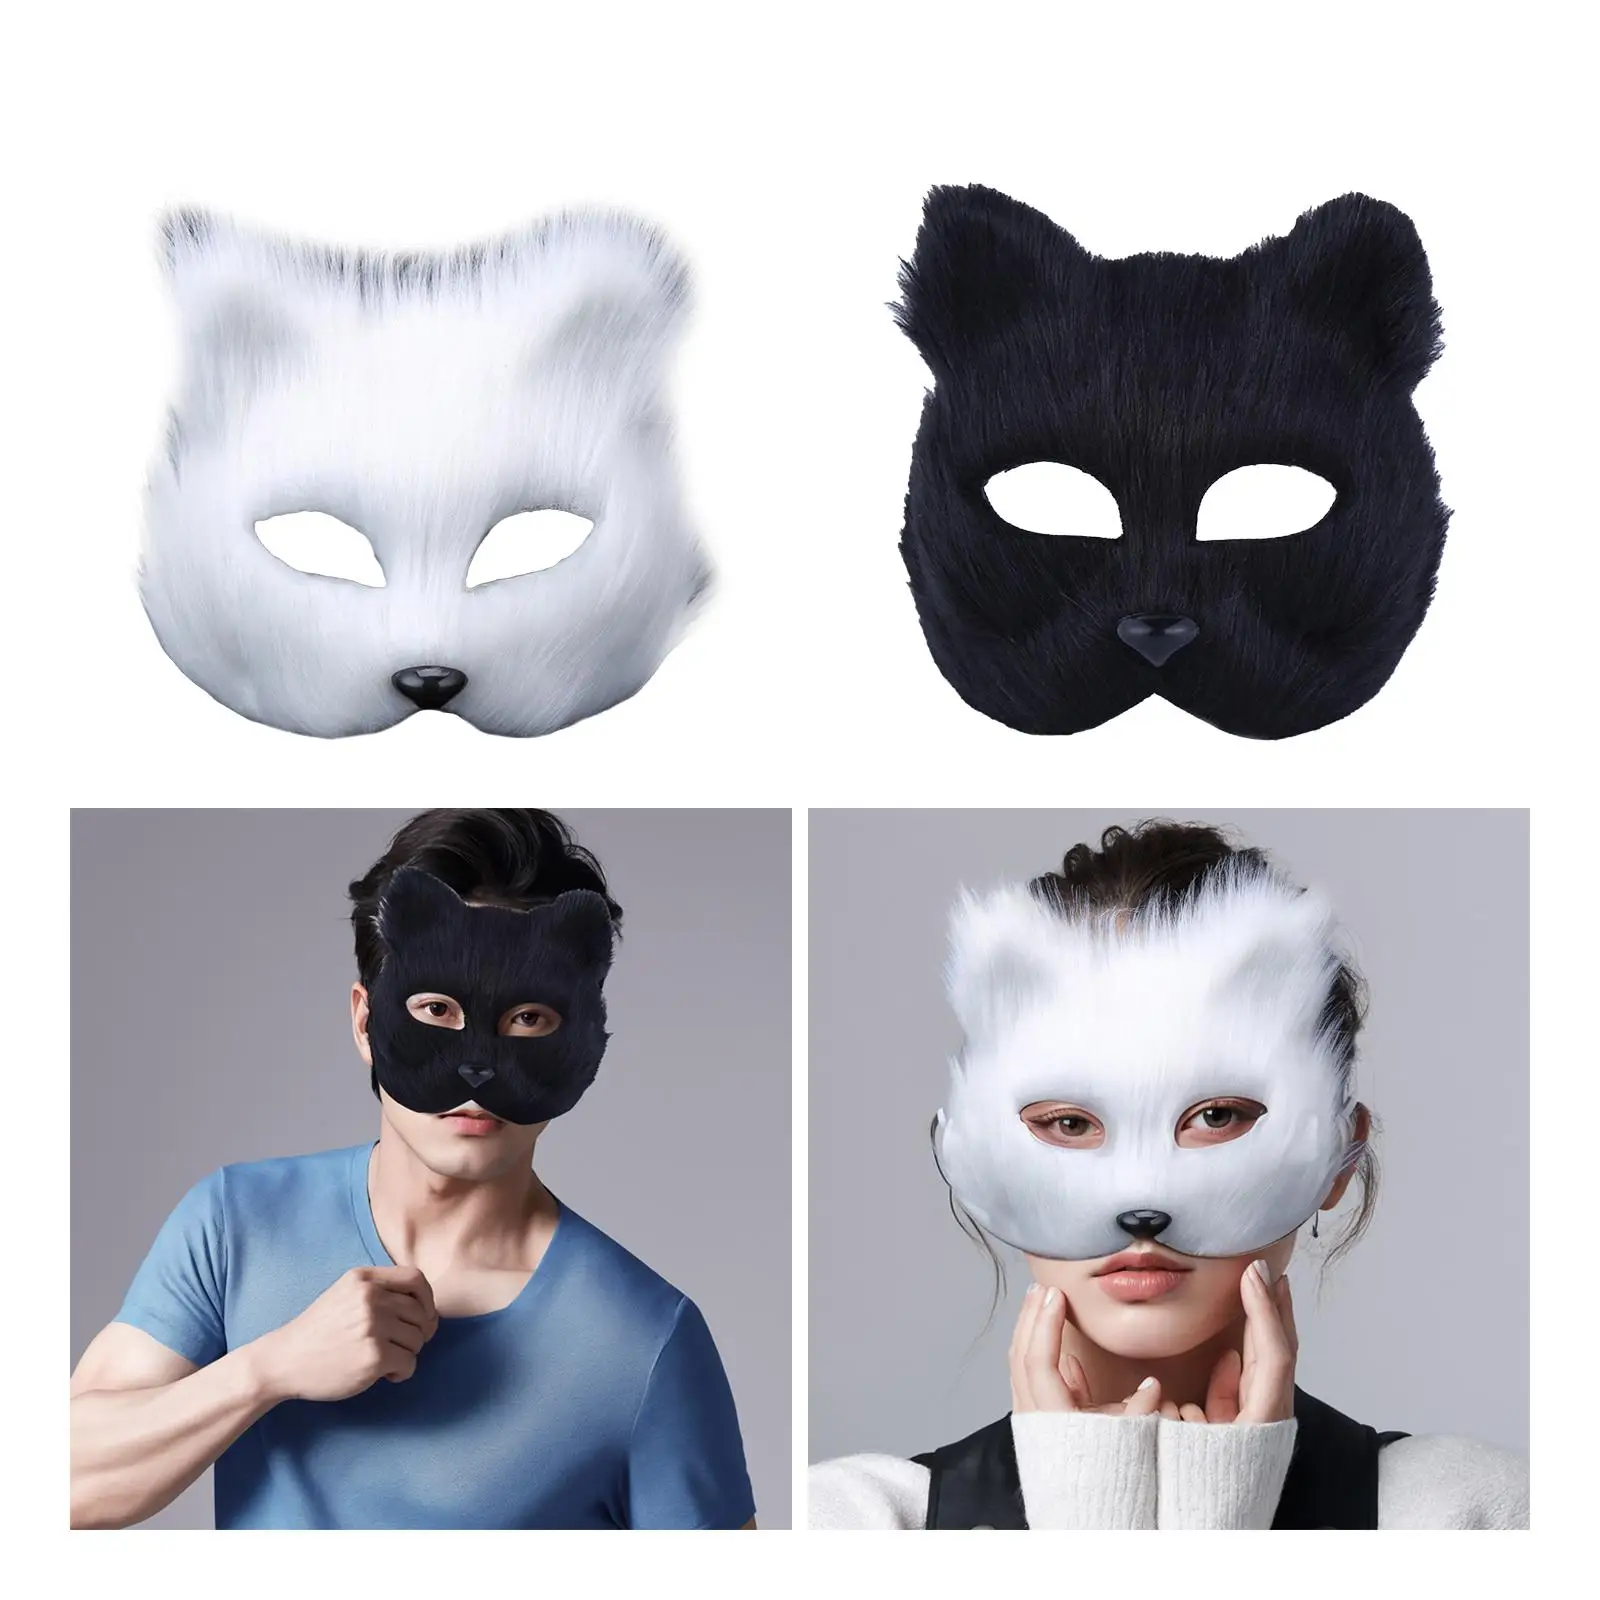 Furry Fox Mask Dress up Holiday Mardi Gras Mask Decoration Club Prom Mask Stage Performance Roles Play Funny Fox Halloween Mask